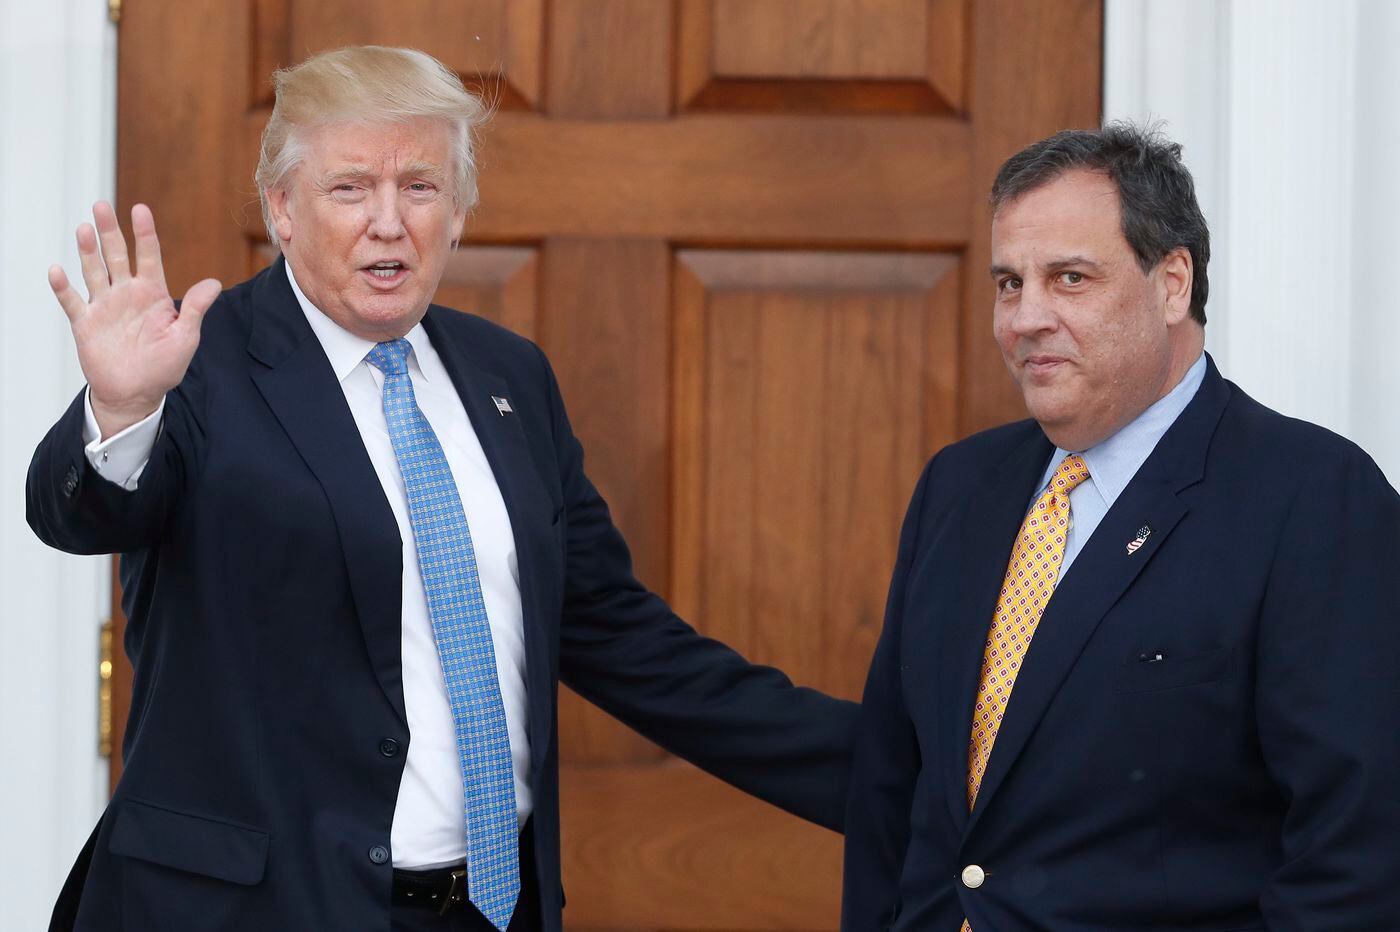 Chris Christie Calls The Conduct Of Trump S Legal Team A